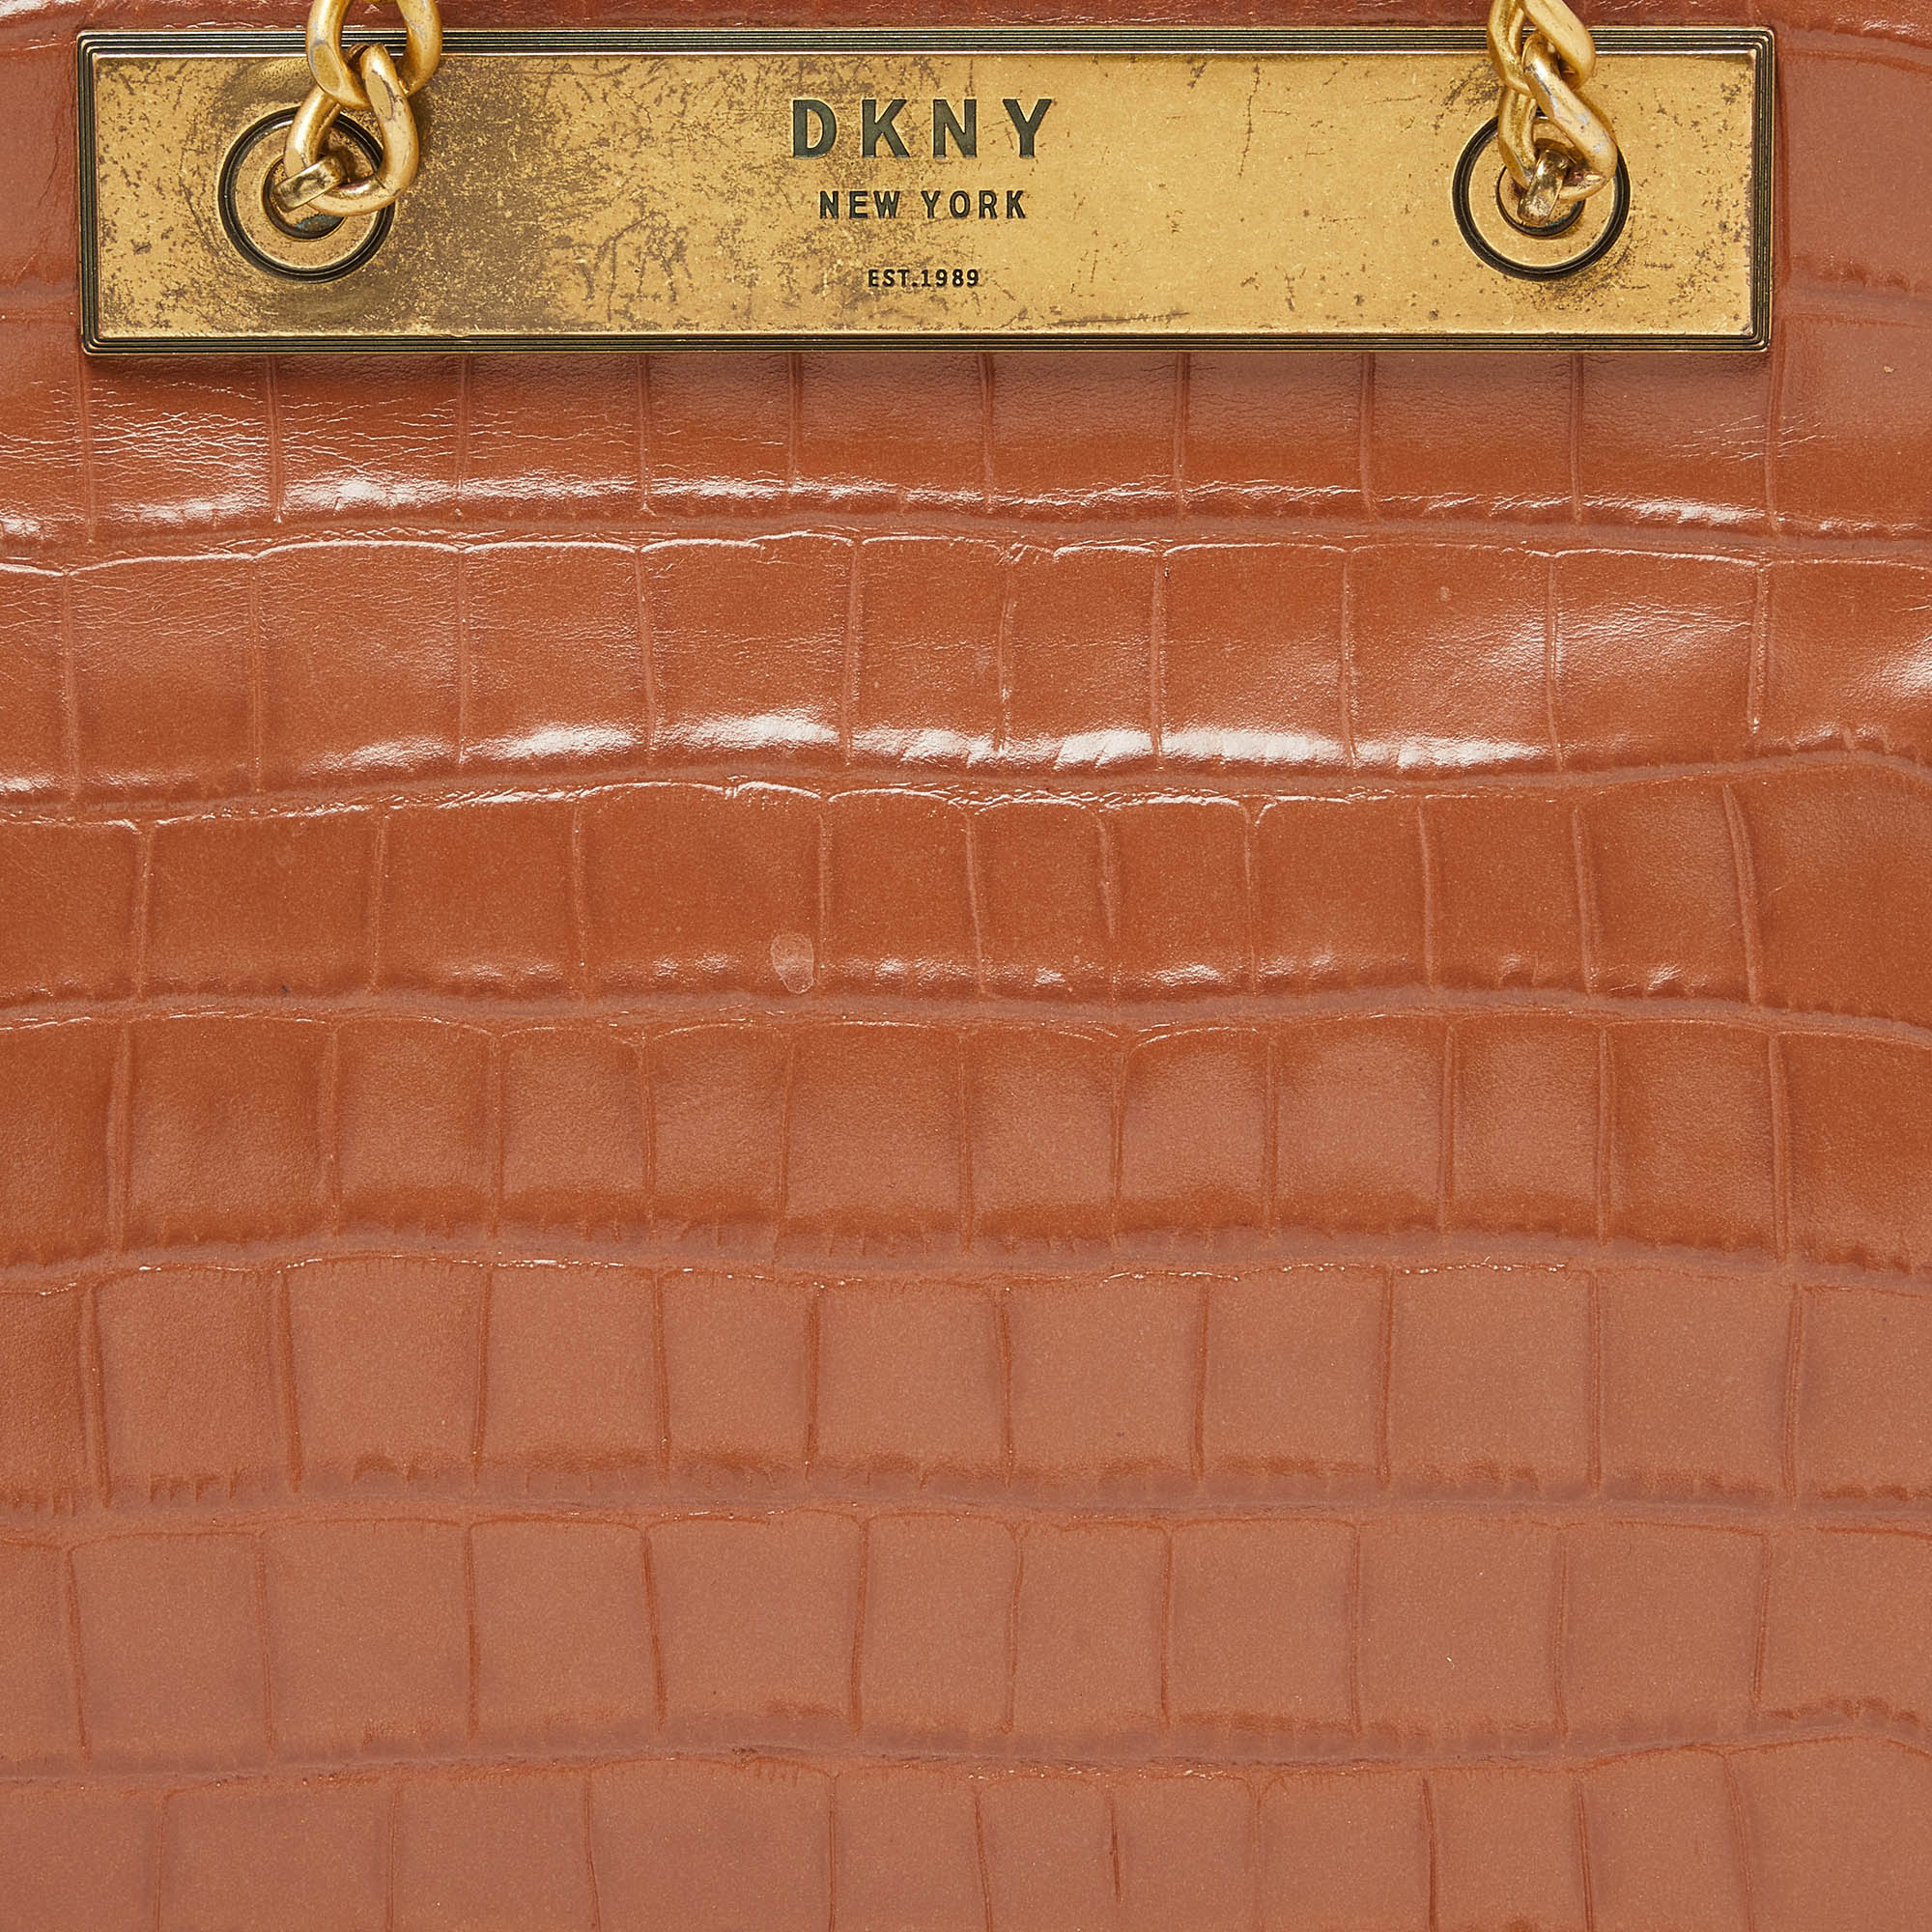 DKNY Brown Croc Embossed Leather Chain Bag